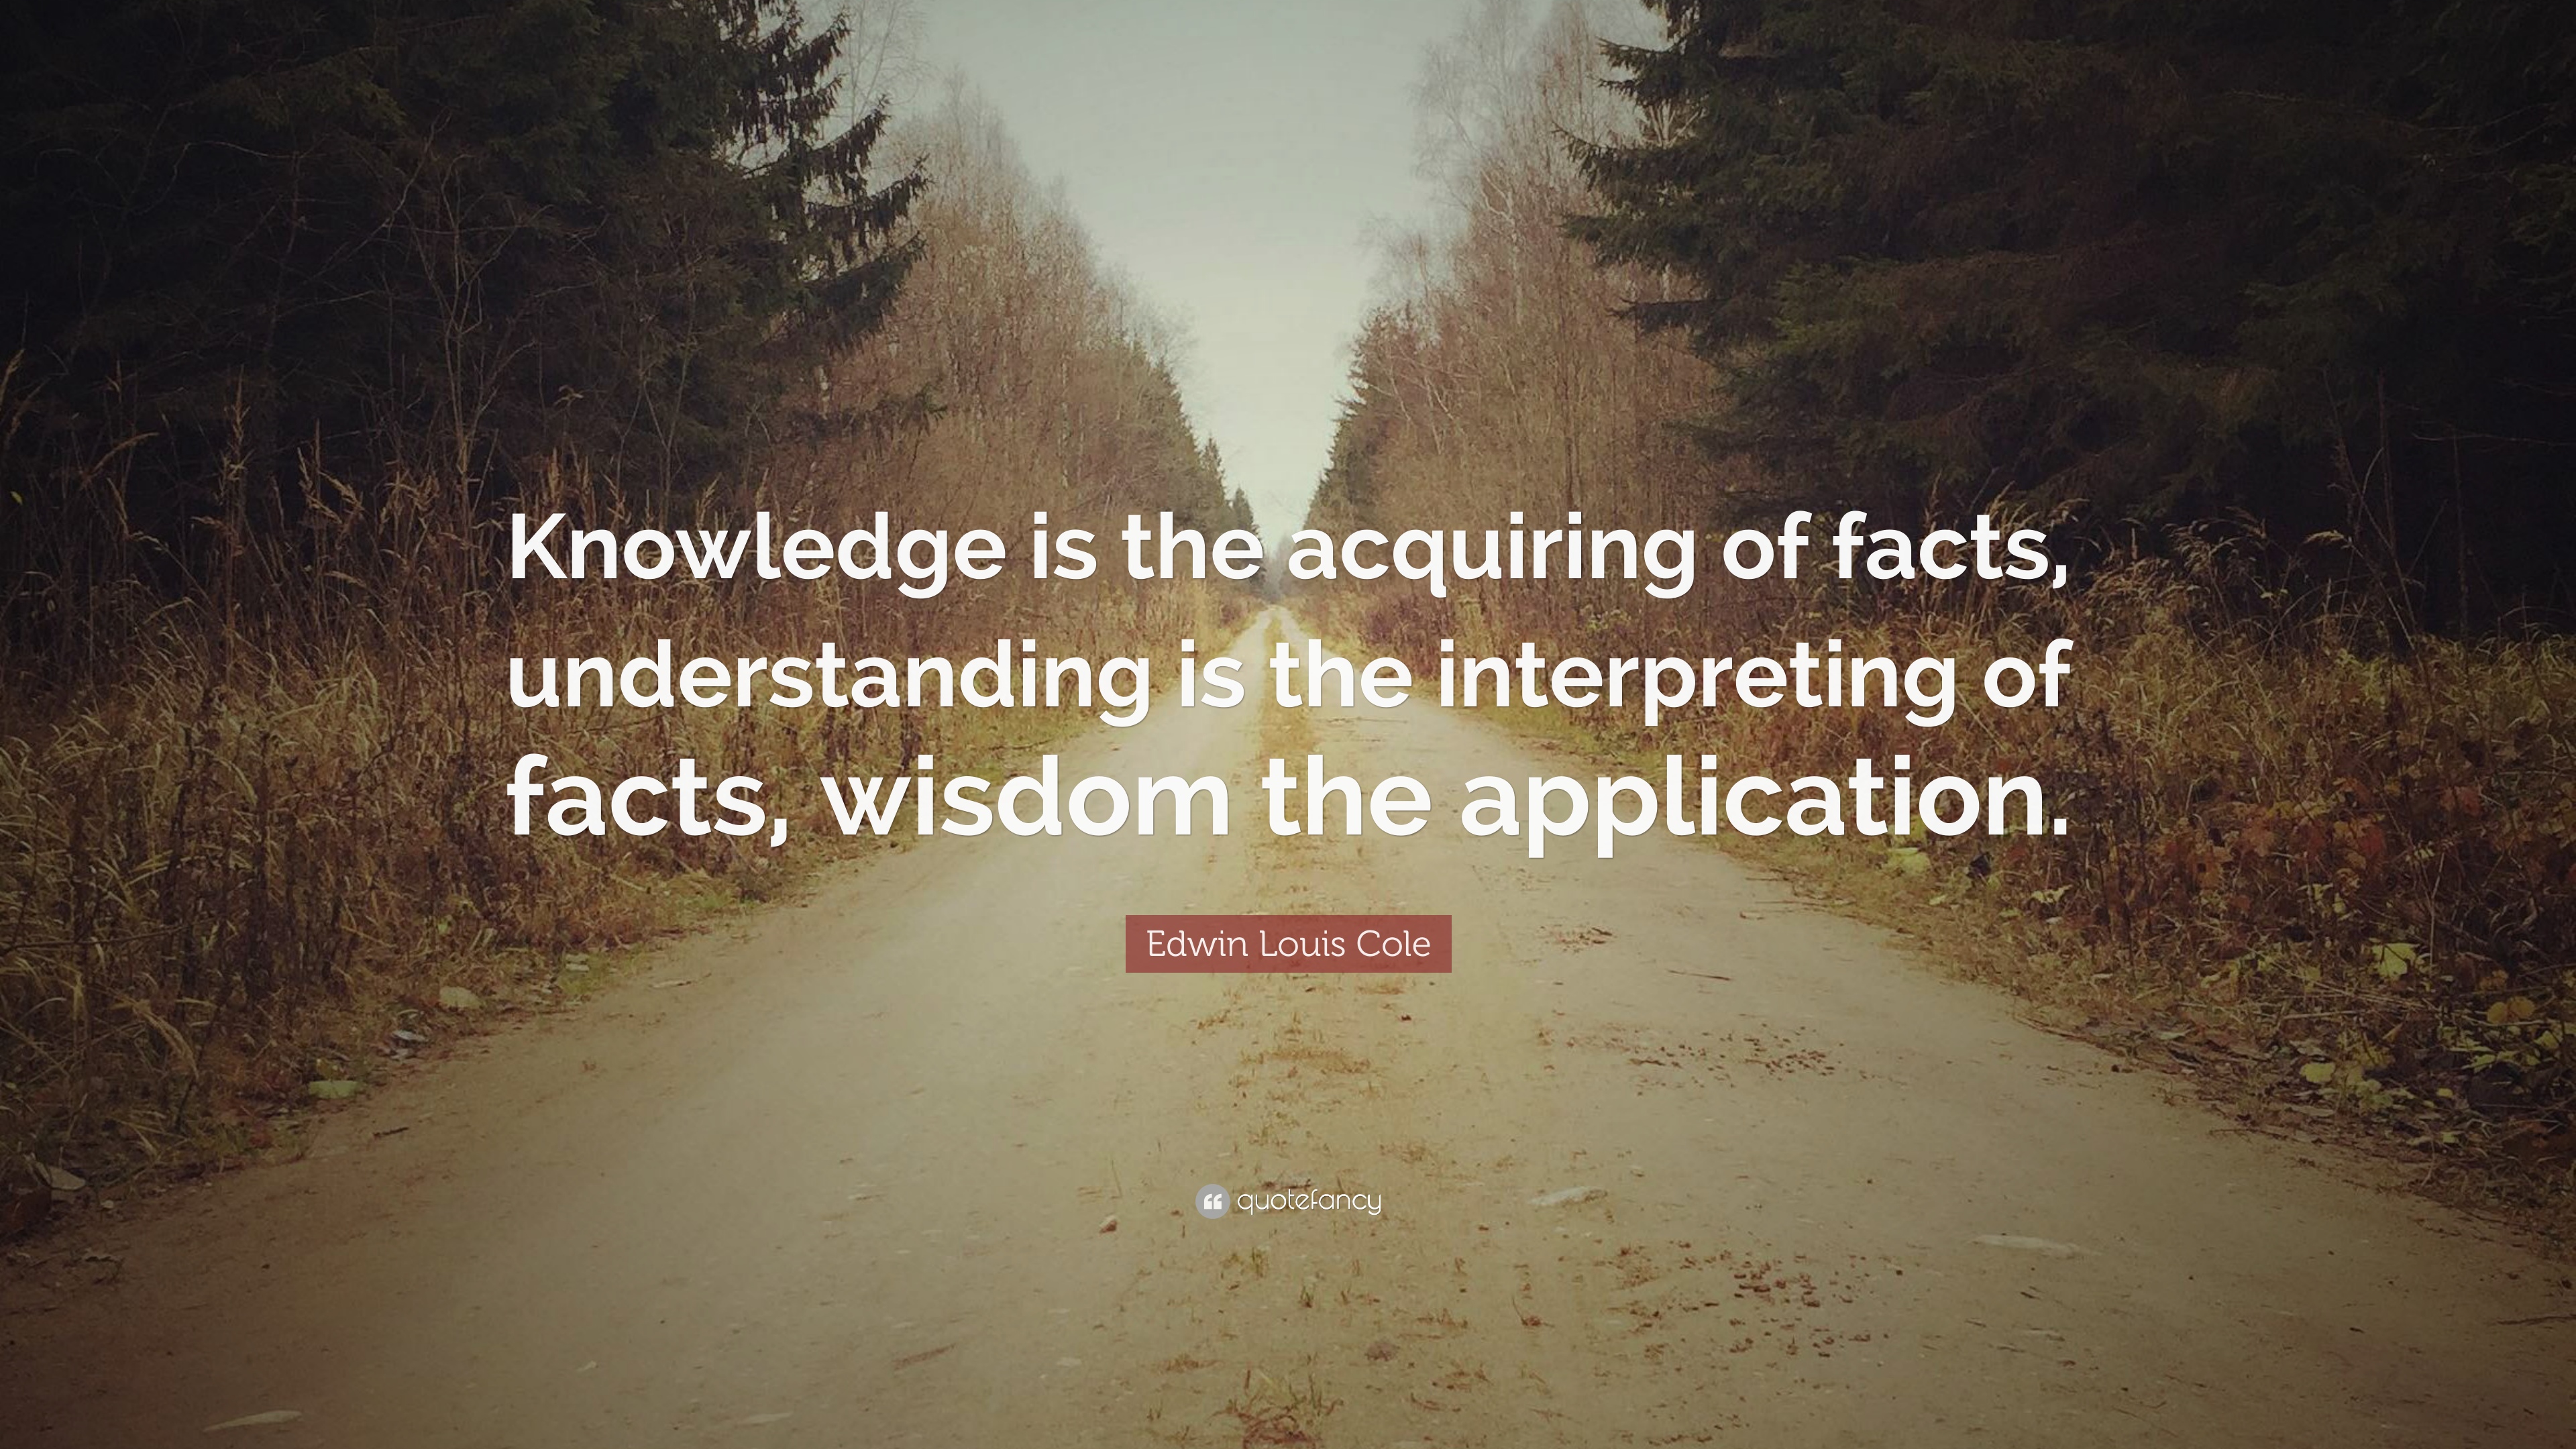 Edwin Louis Cole Quote: “Knowledge is the acquiring of facts